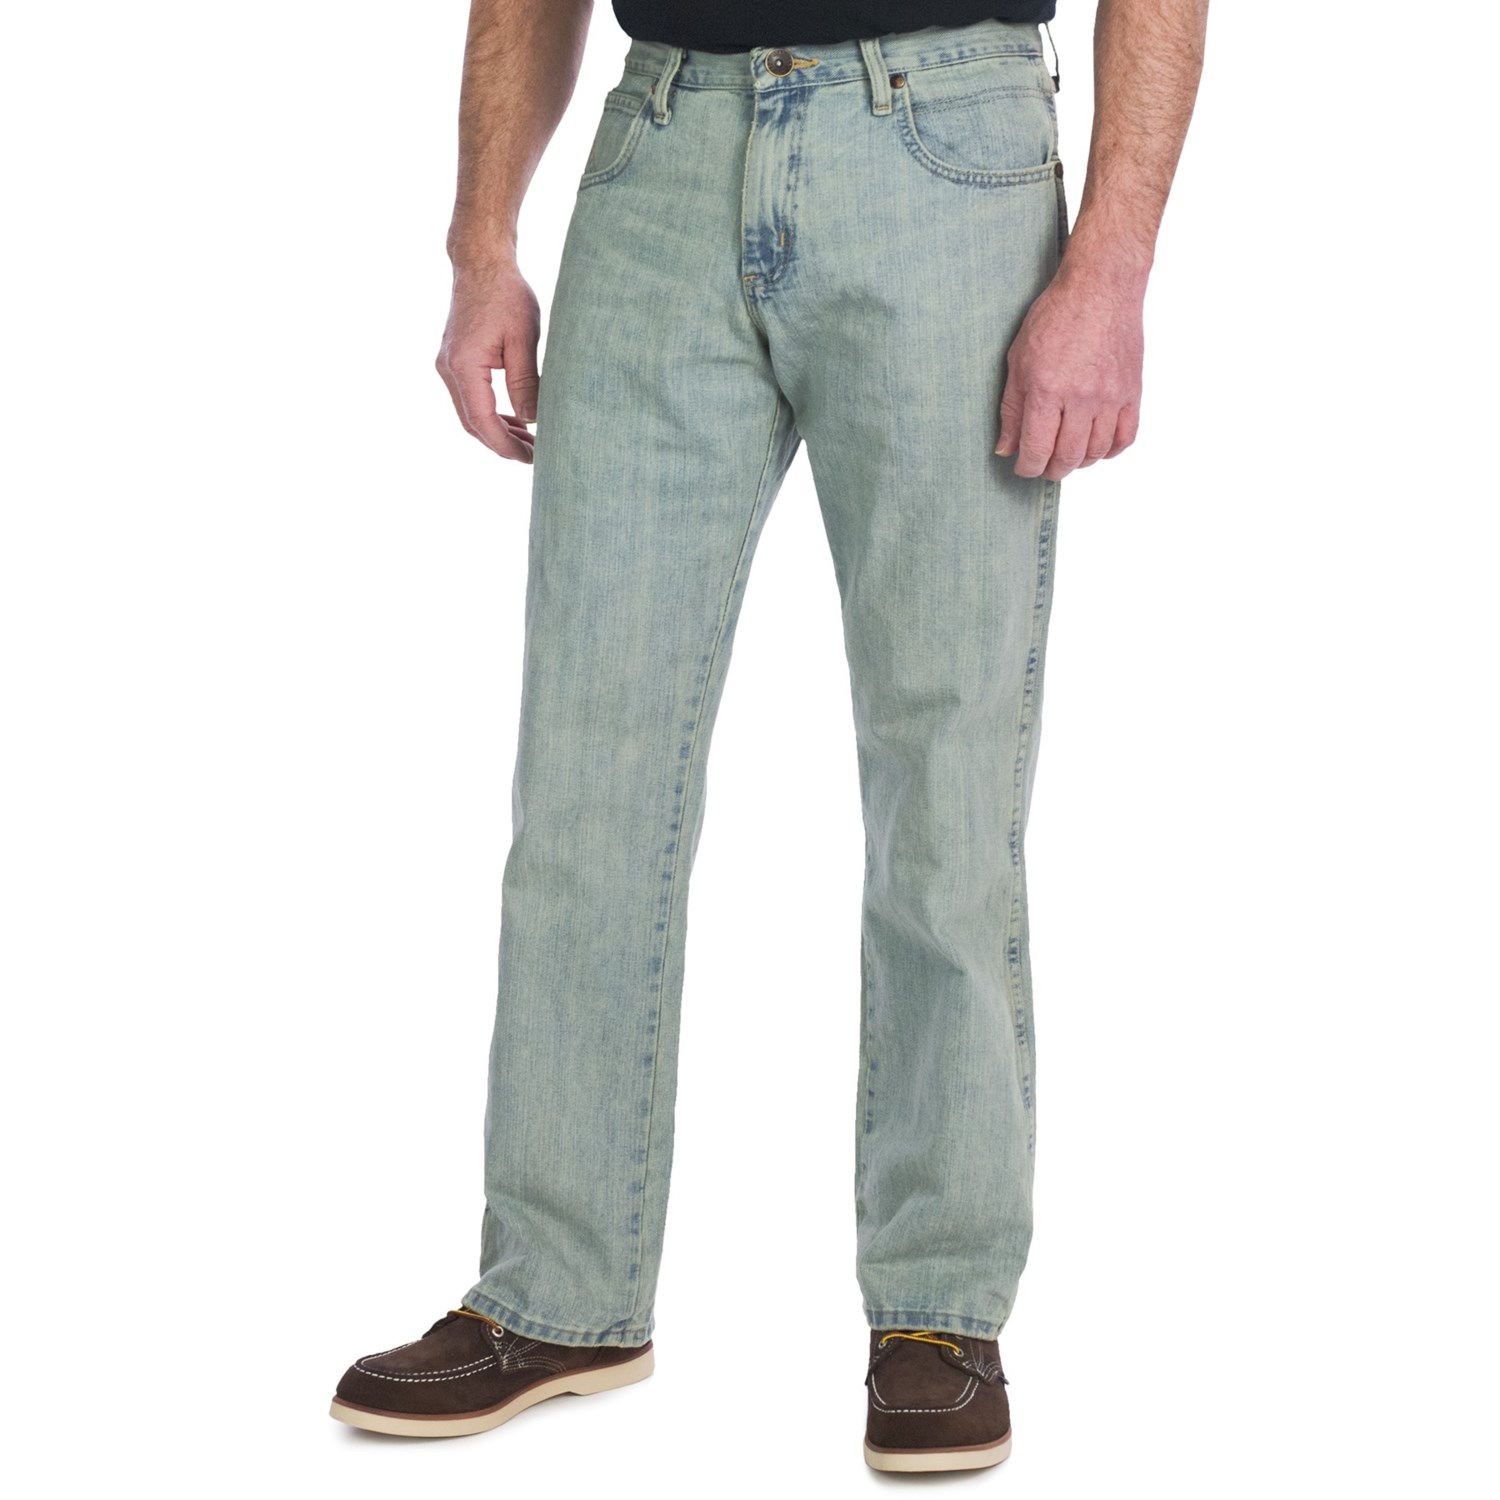 Wrangler Retro IRS Jeans - Relaxed Fit, Bootcut (For Men) - Save 43%